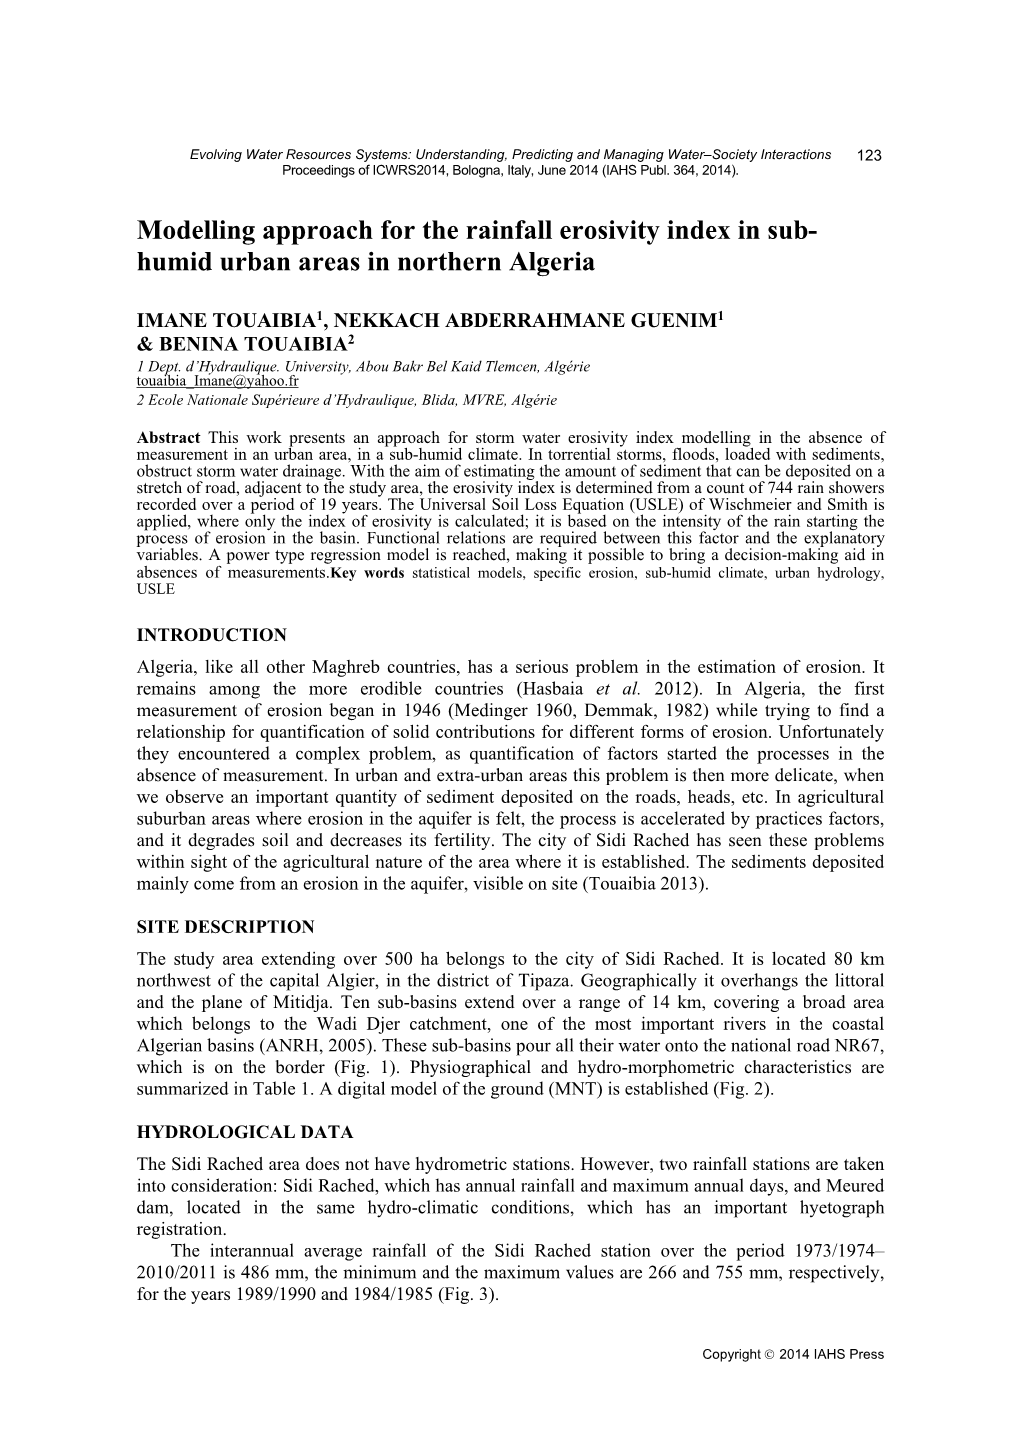 Modelling Approach for the Rainfall Erosivity Index in Sub- Humid Urban Areas in Northern Algeria